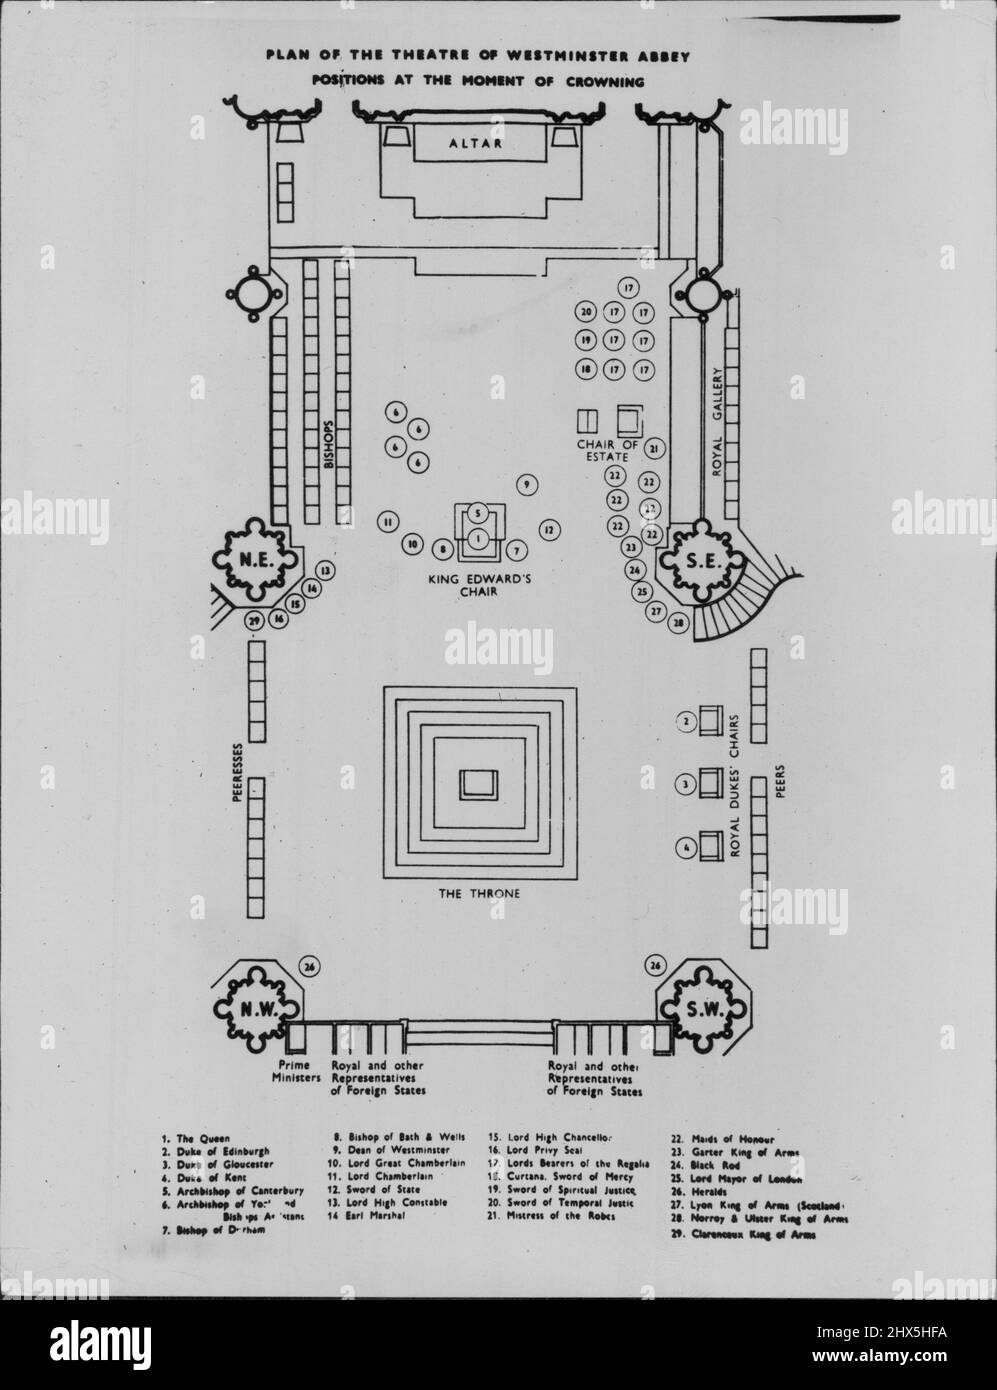 Plan of the Theatre of Westminster Abbey Positions at the Moment of Crowning. May 21, 1953. Stock Photo